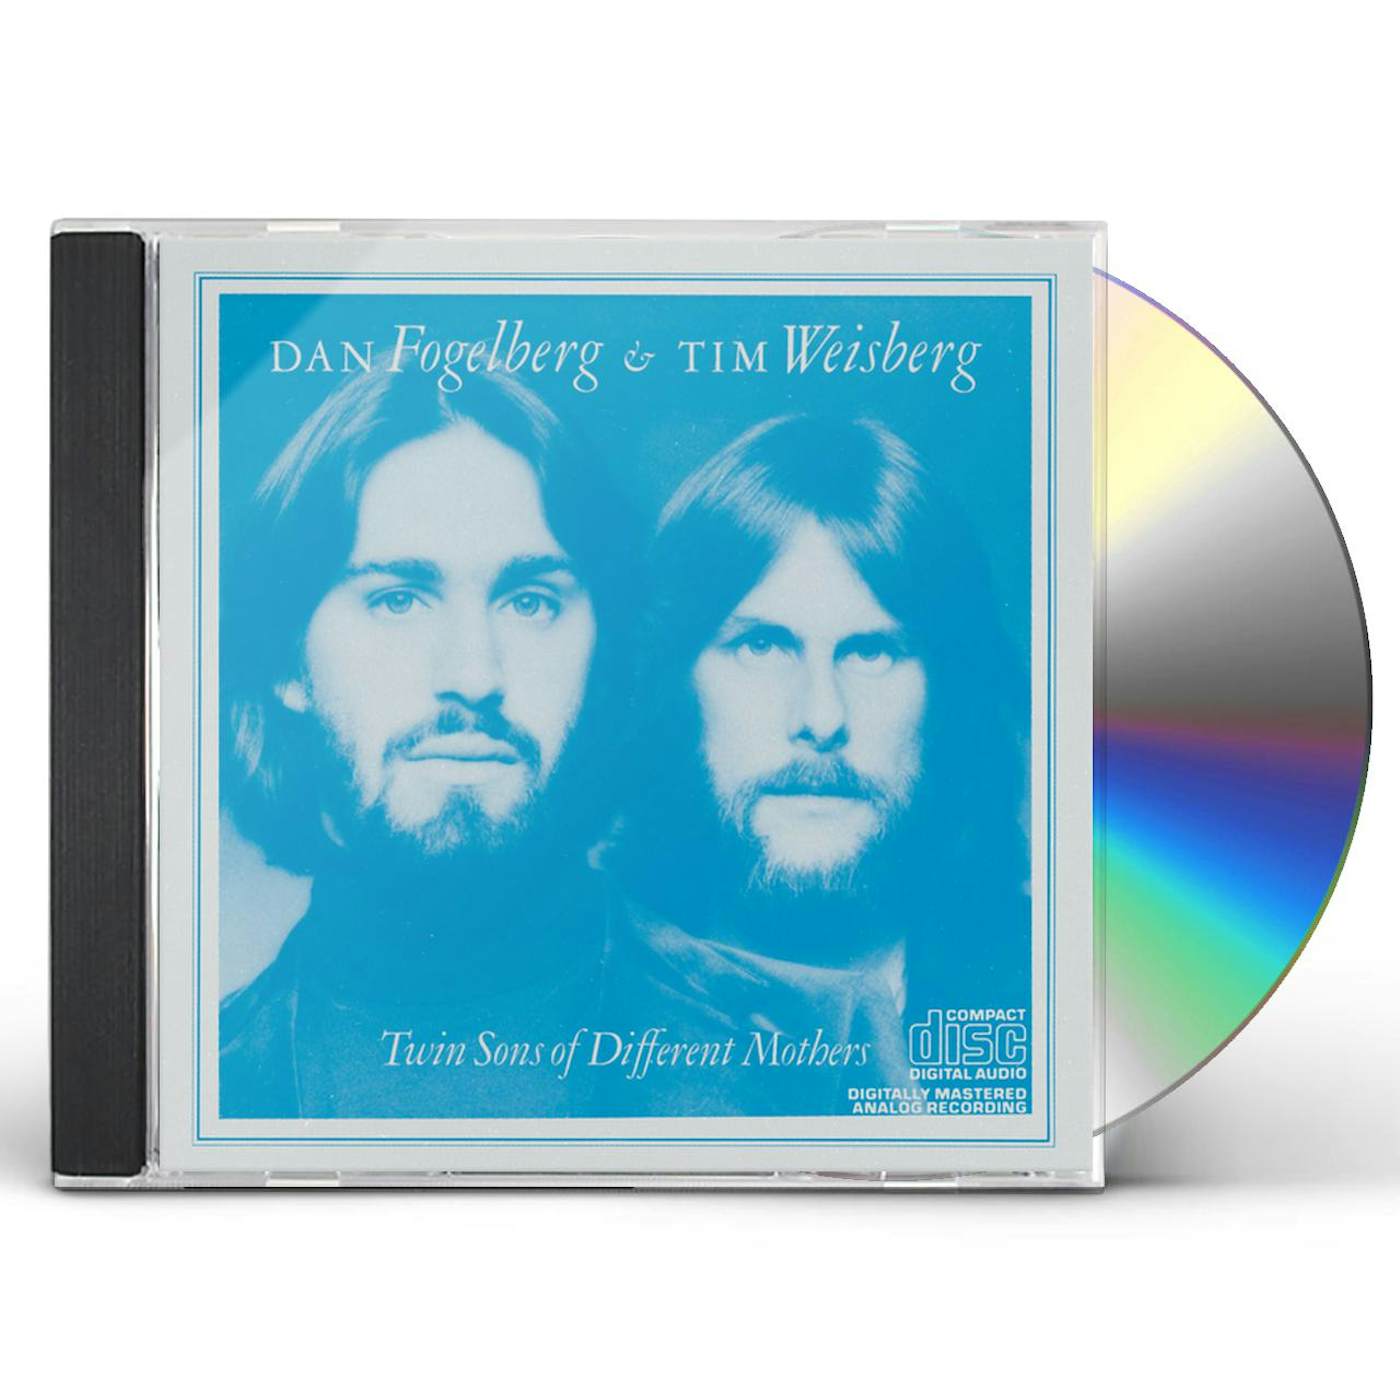 Dan Fogelberg TWIN SONS OF DIFFERENT MOTHERS CD